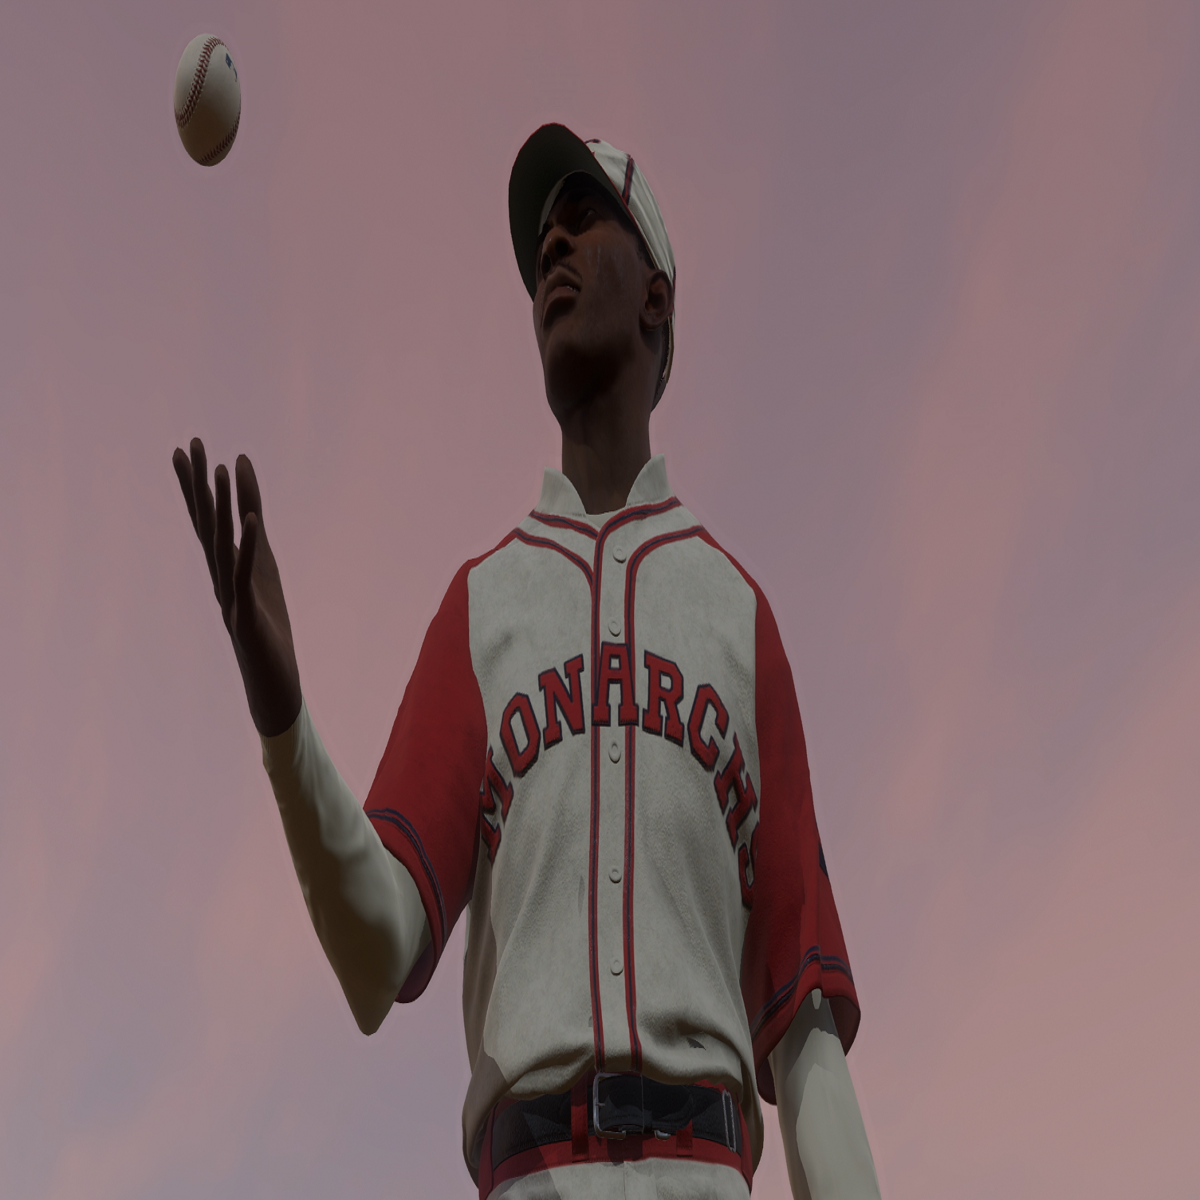 Restoring a missing piece of history with MLB: The Show's Negro